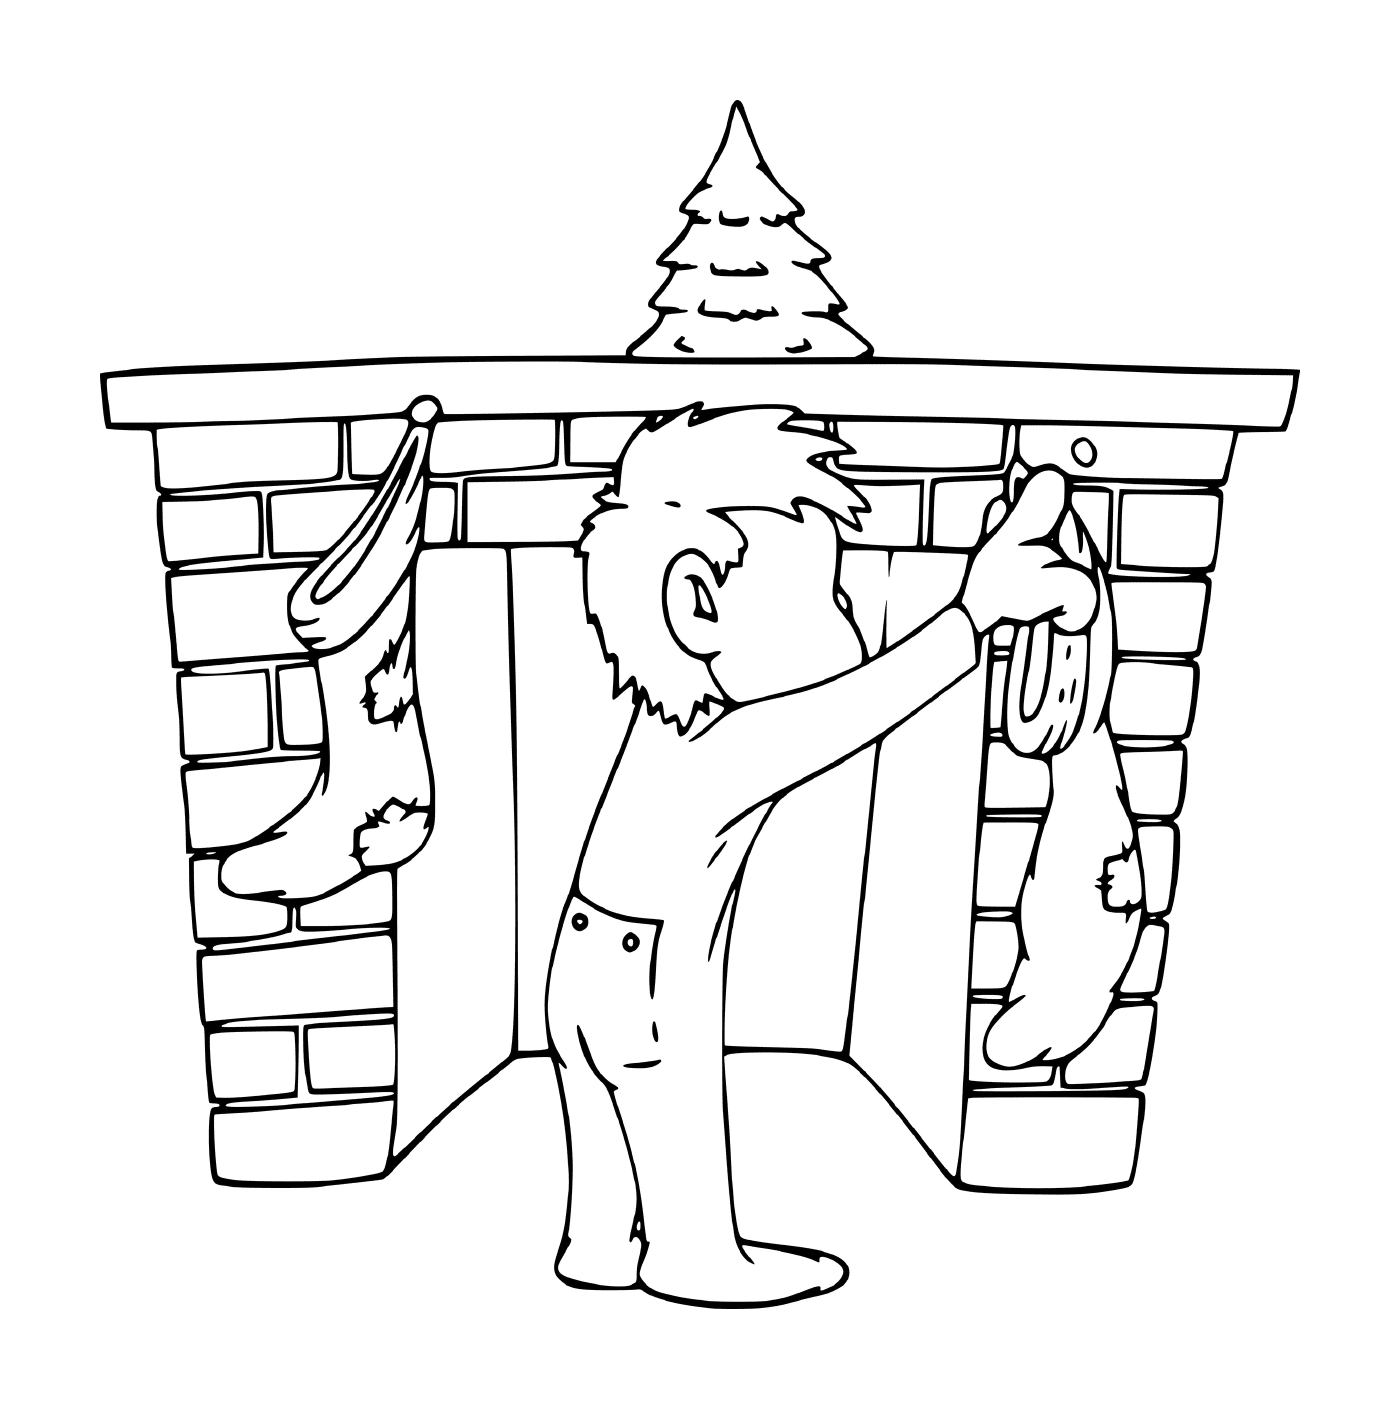  A child hangs a Christmas stockings on the home coat 